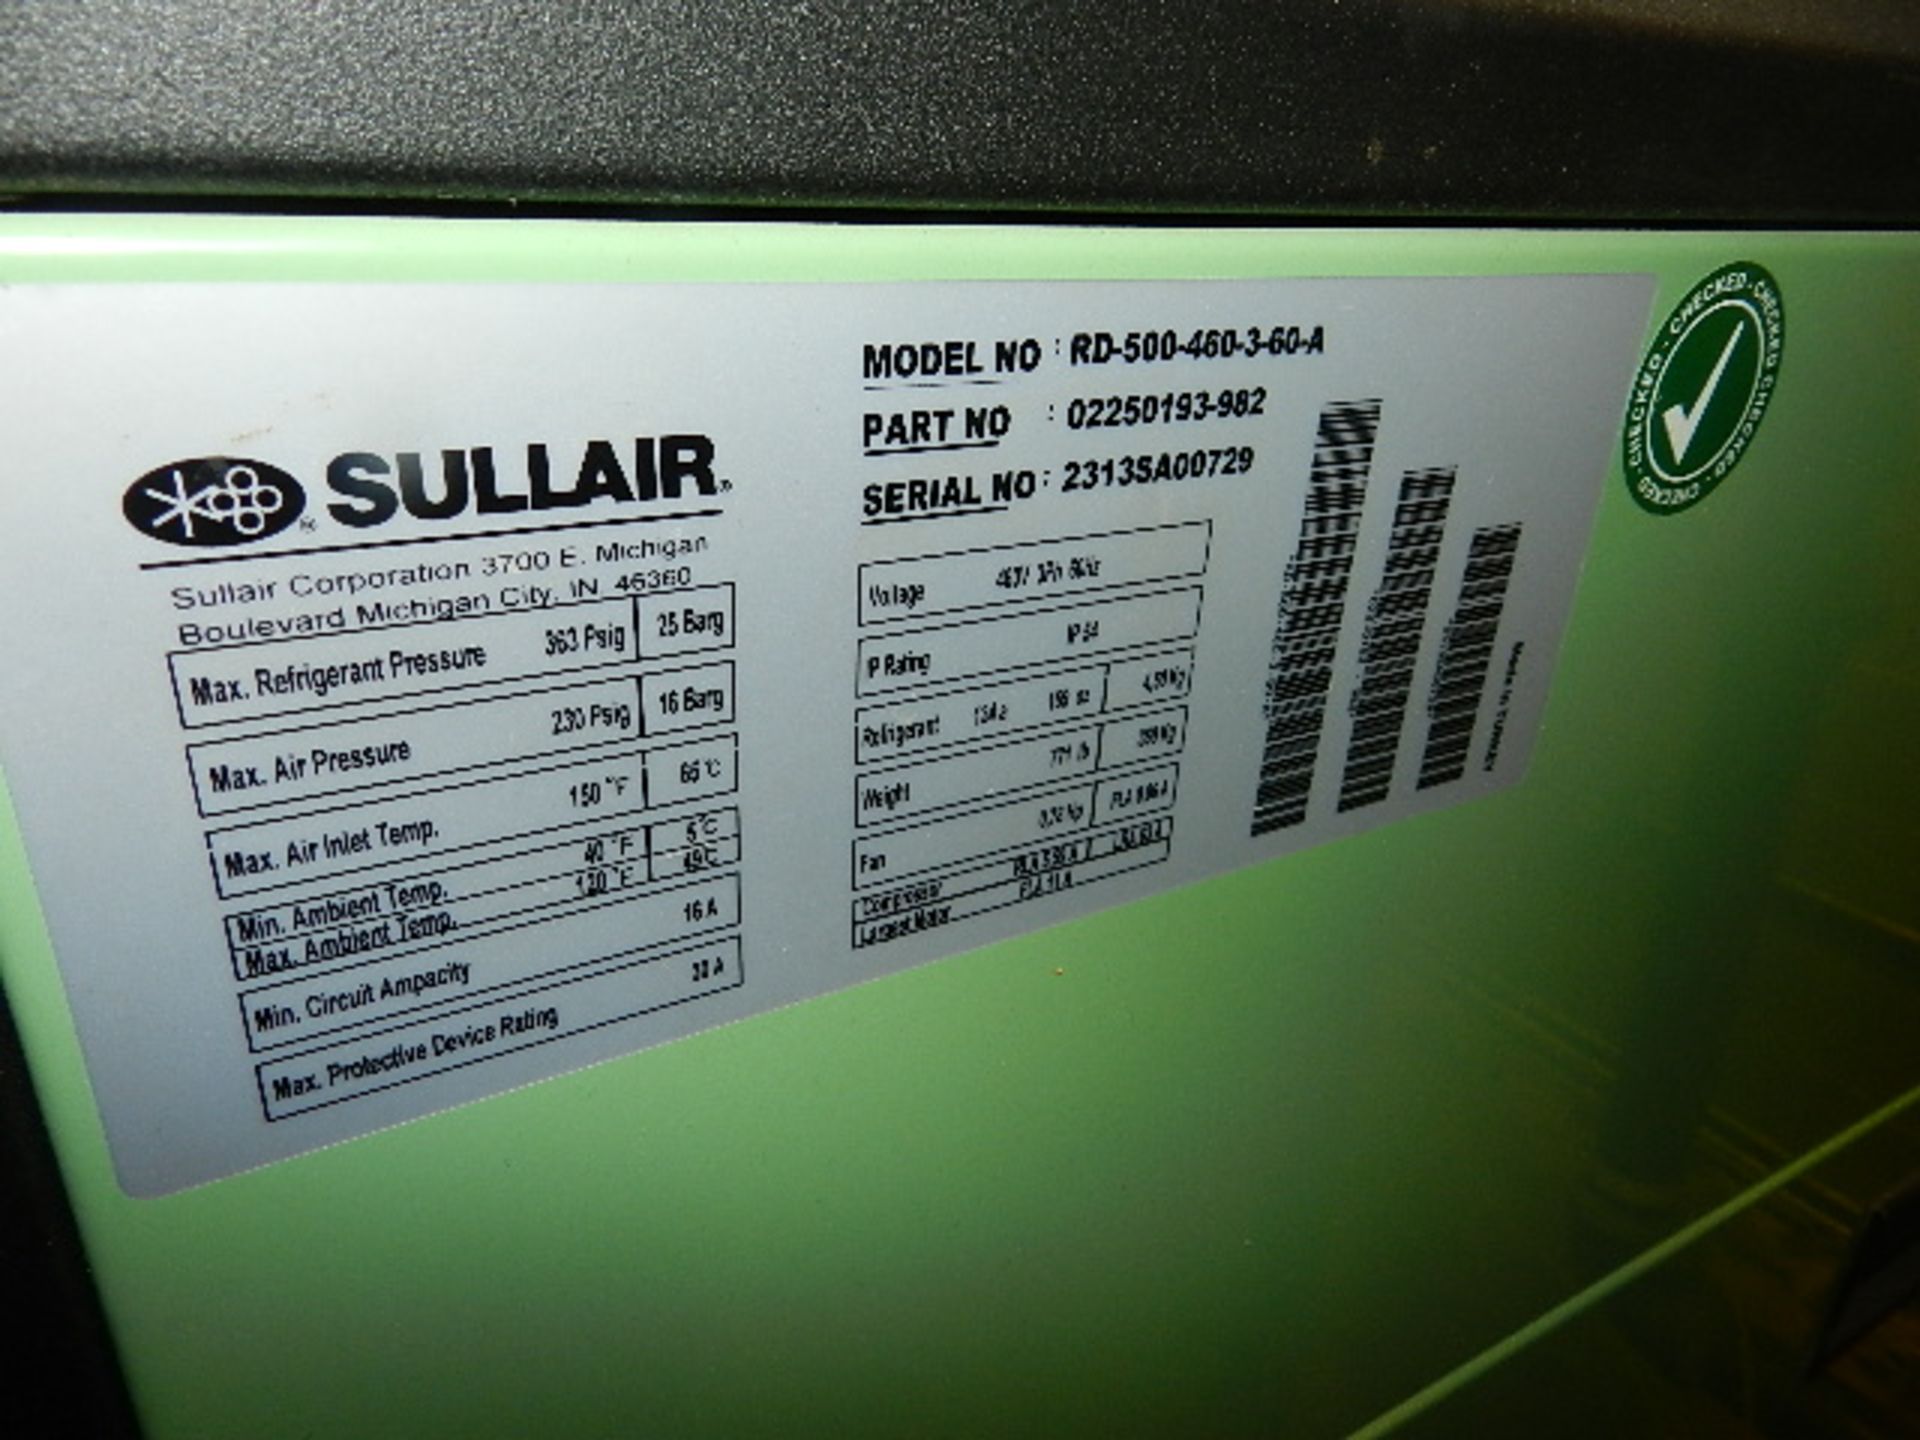 Sullair air dryer, model RD-500-460-3-60-A, 460 volt, 3 phase, 230 psi, includes tank, 17,114 - Image 4 of 5